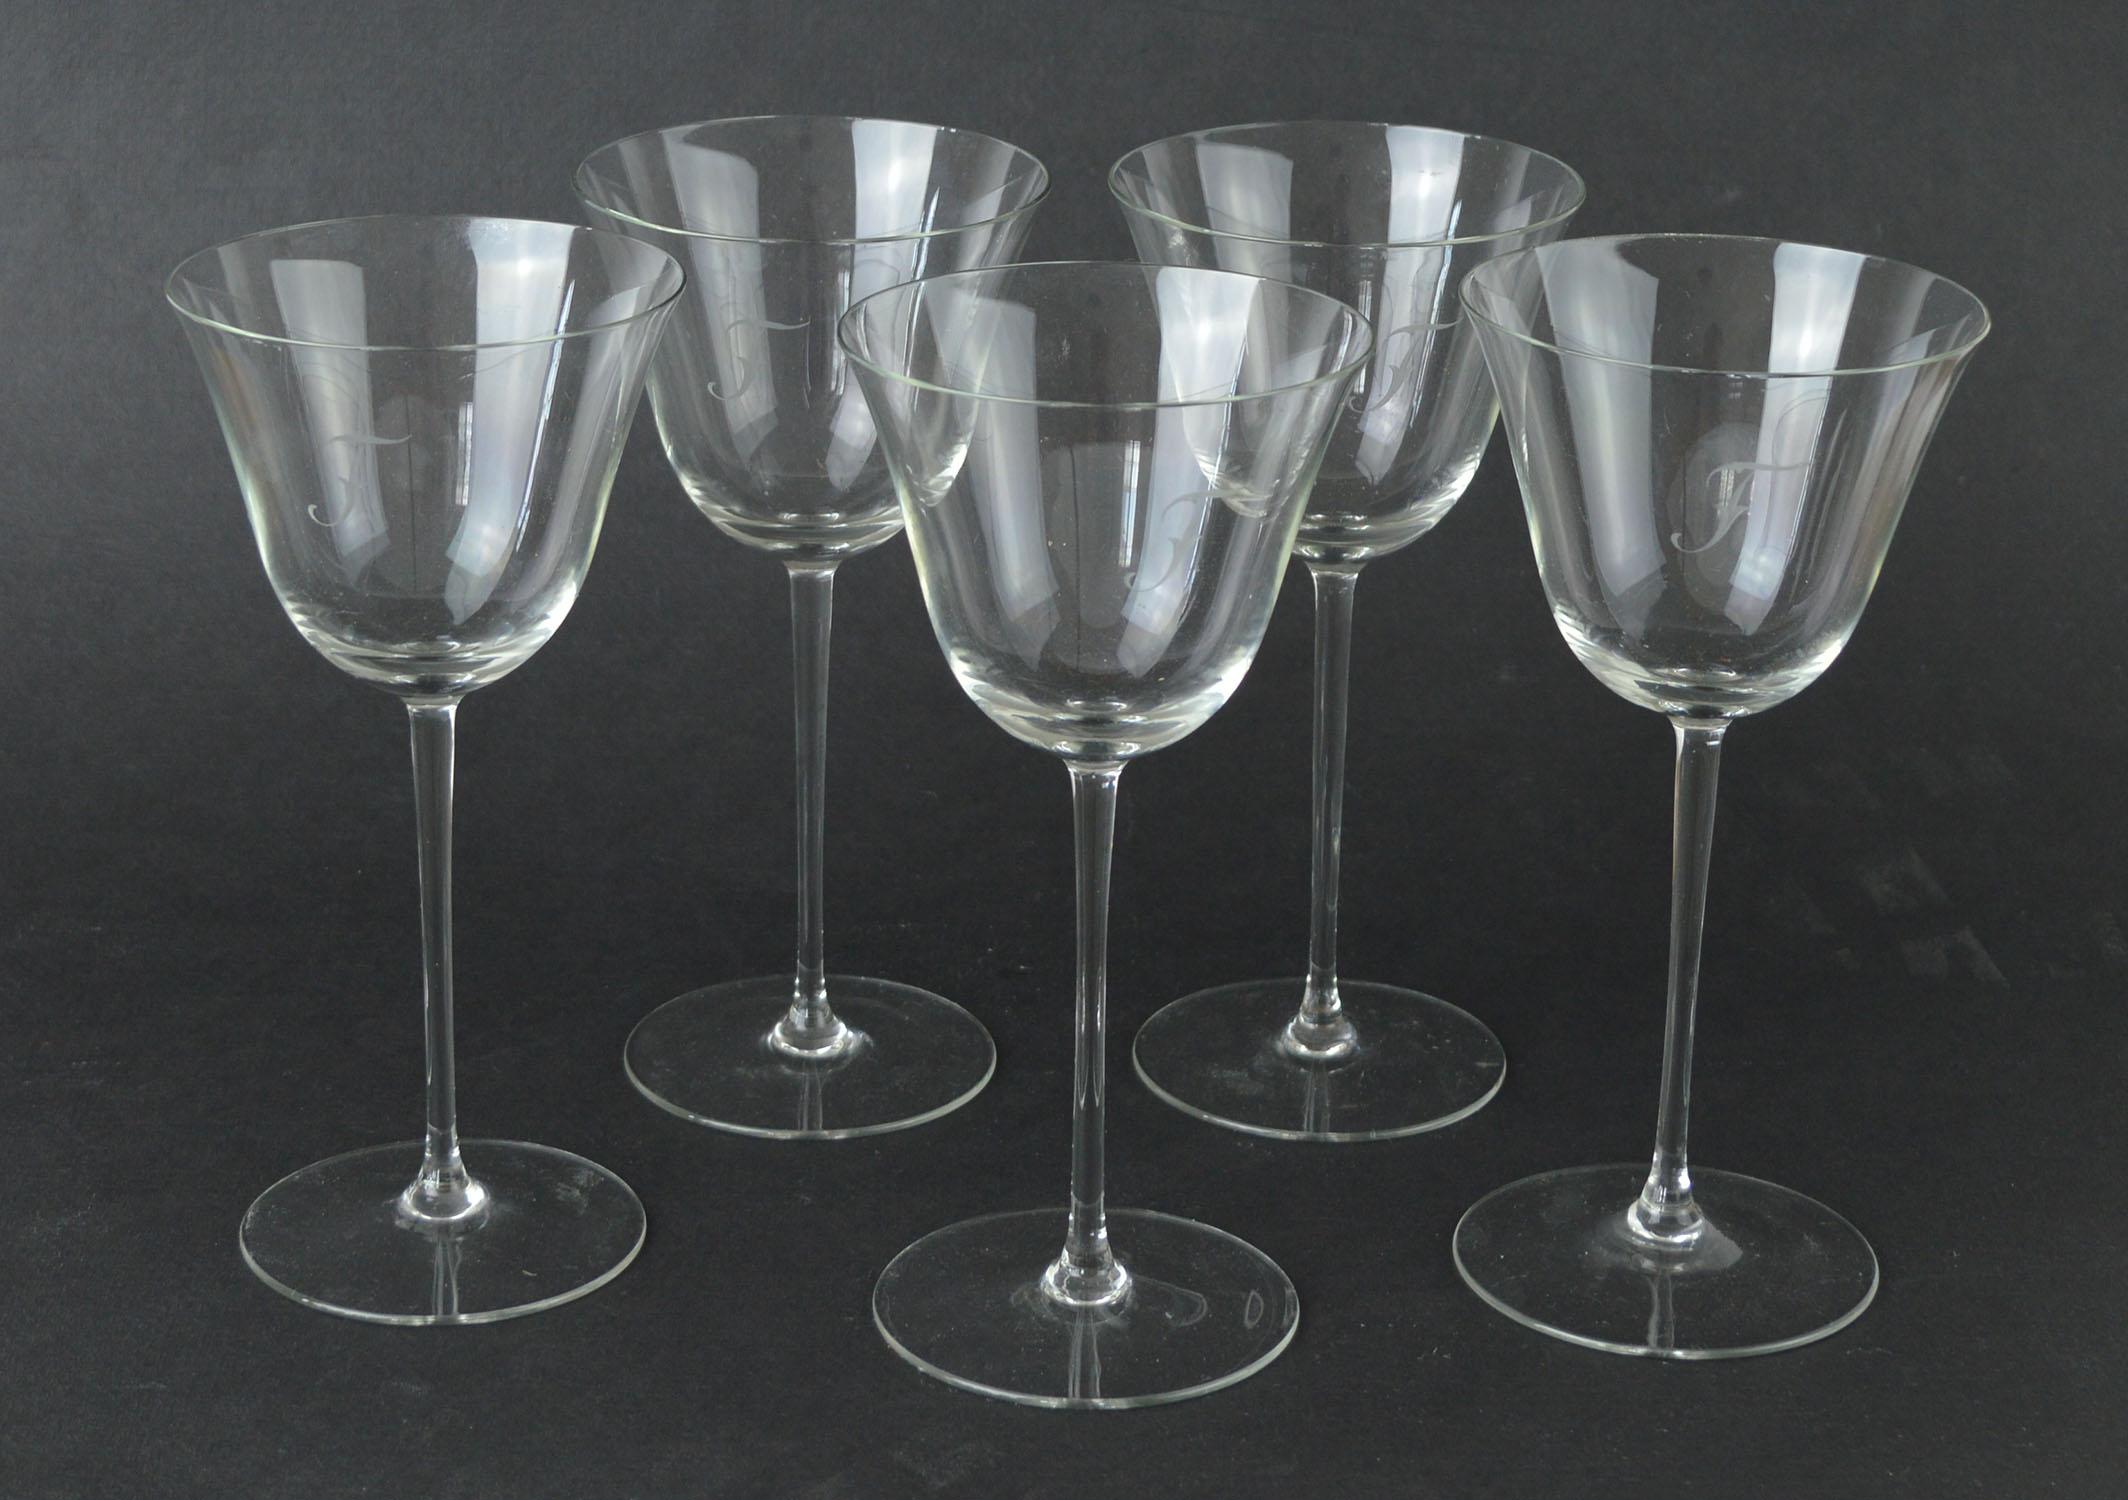 Really fine glass. Perfect condition.

Please note originally 5 but now 4

Lovely shape. Monogrammed with an engraved initial 